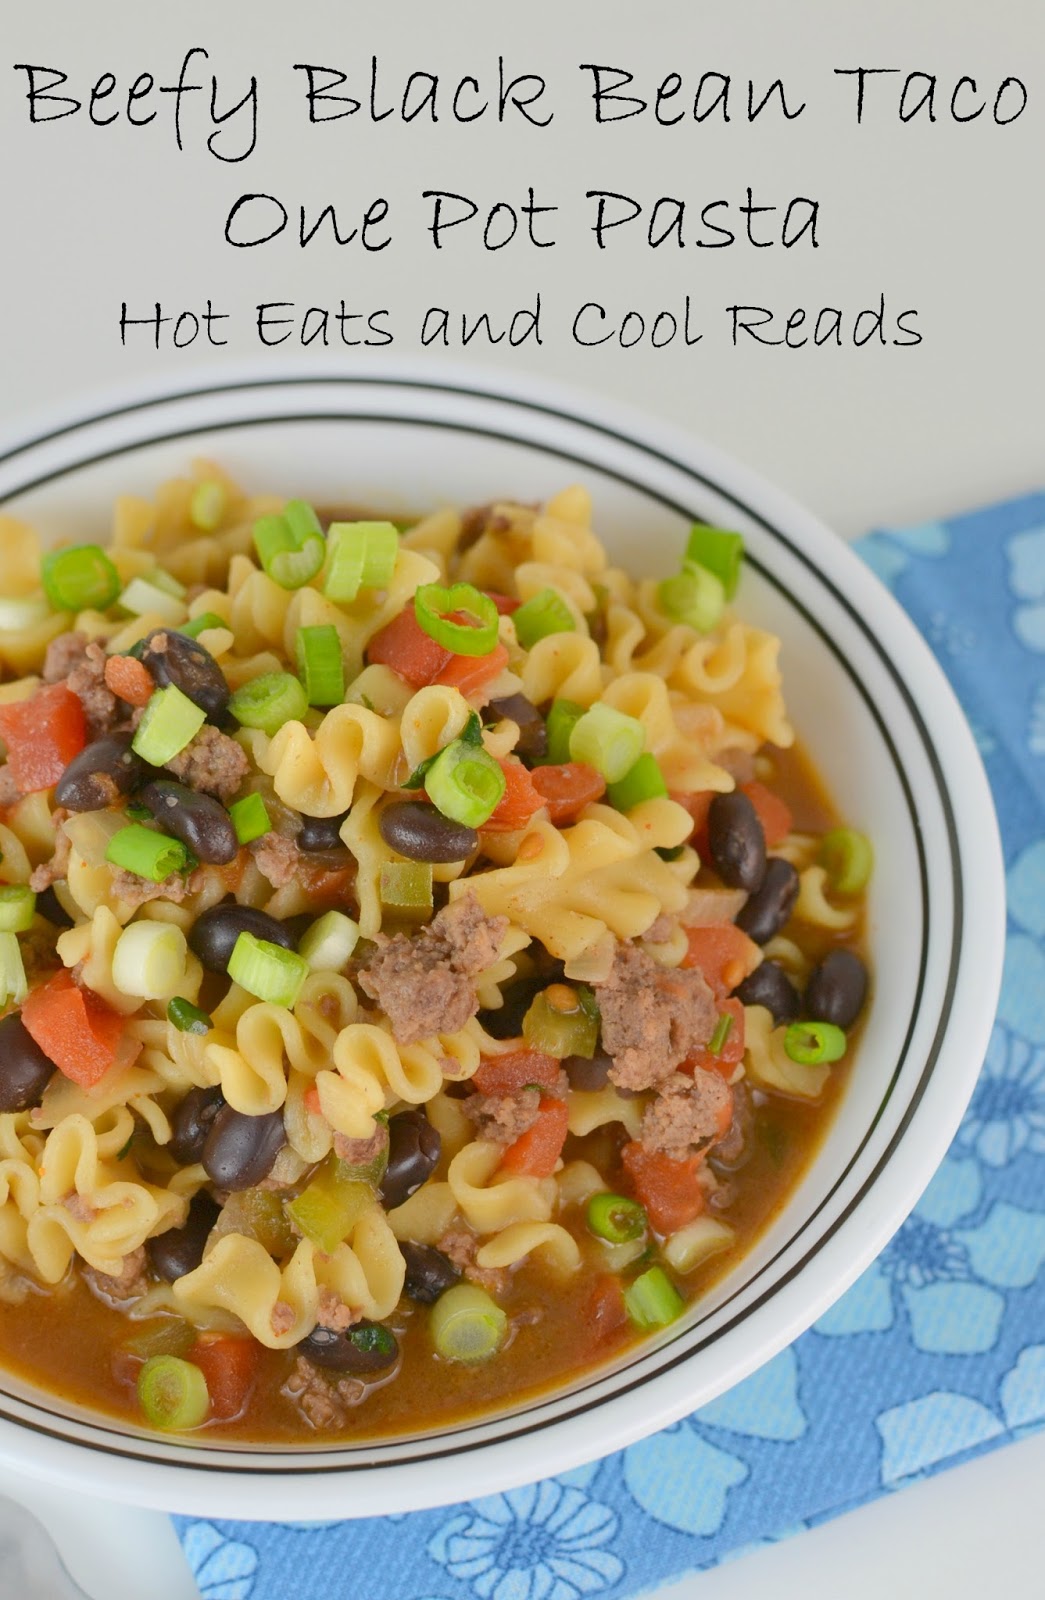 Ready in less than 30 minutes and delicious! Sure to be a new family favorite! Beefy Black Bean Taco One Pot Pasta from Hot Eats and Cool Reads